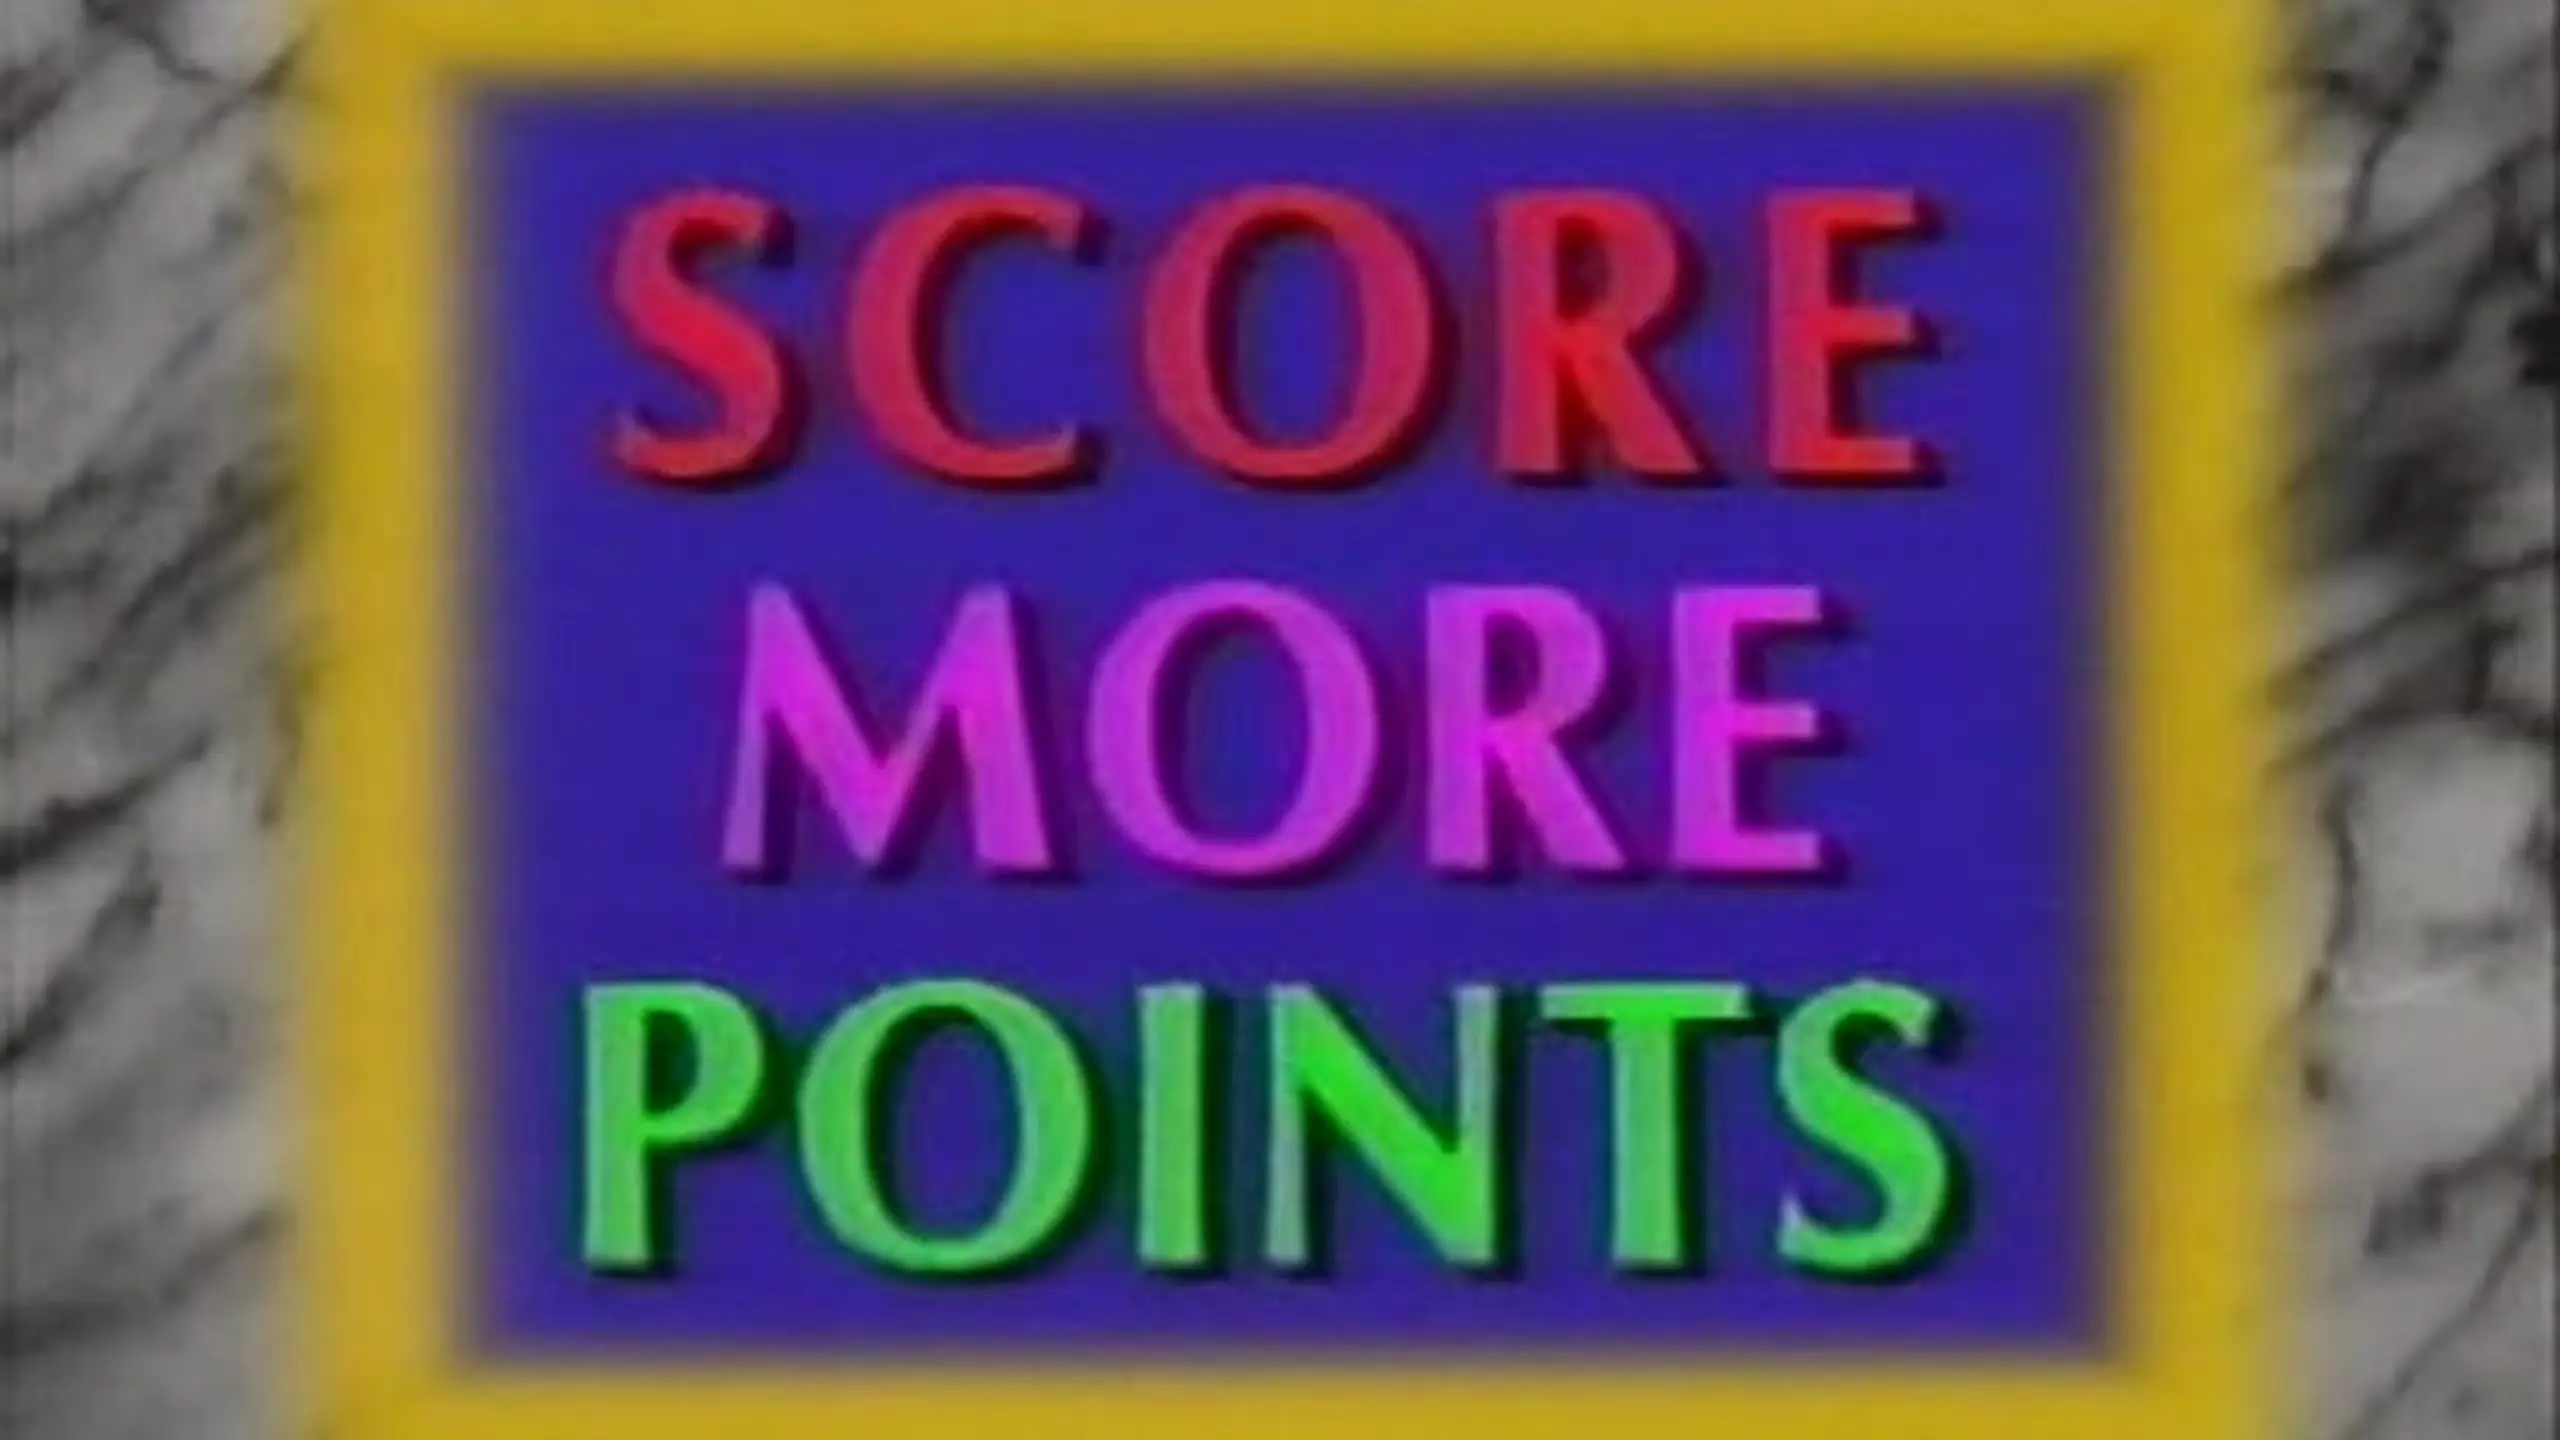 How to Score More Points on Nintendo Games (Yellow)